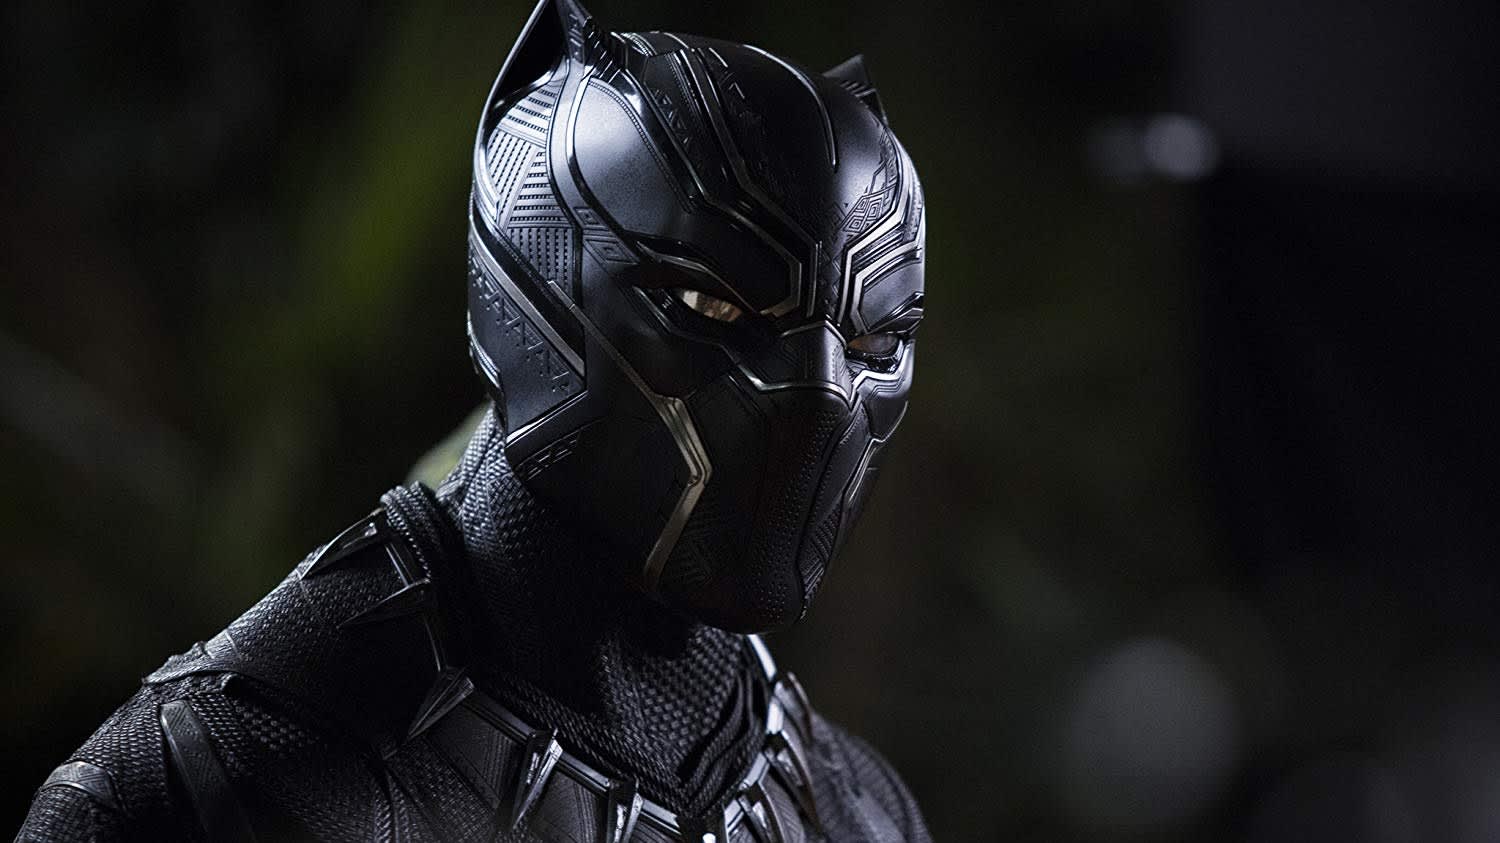 Marvel’s ‘Black Panther’ sequel will begin taking pictures in July, report says